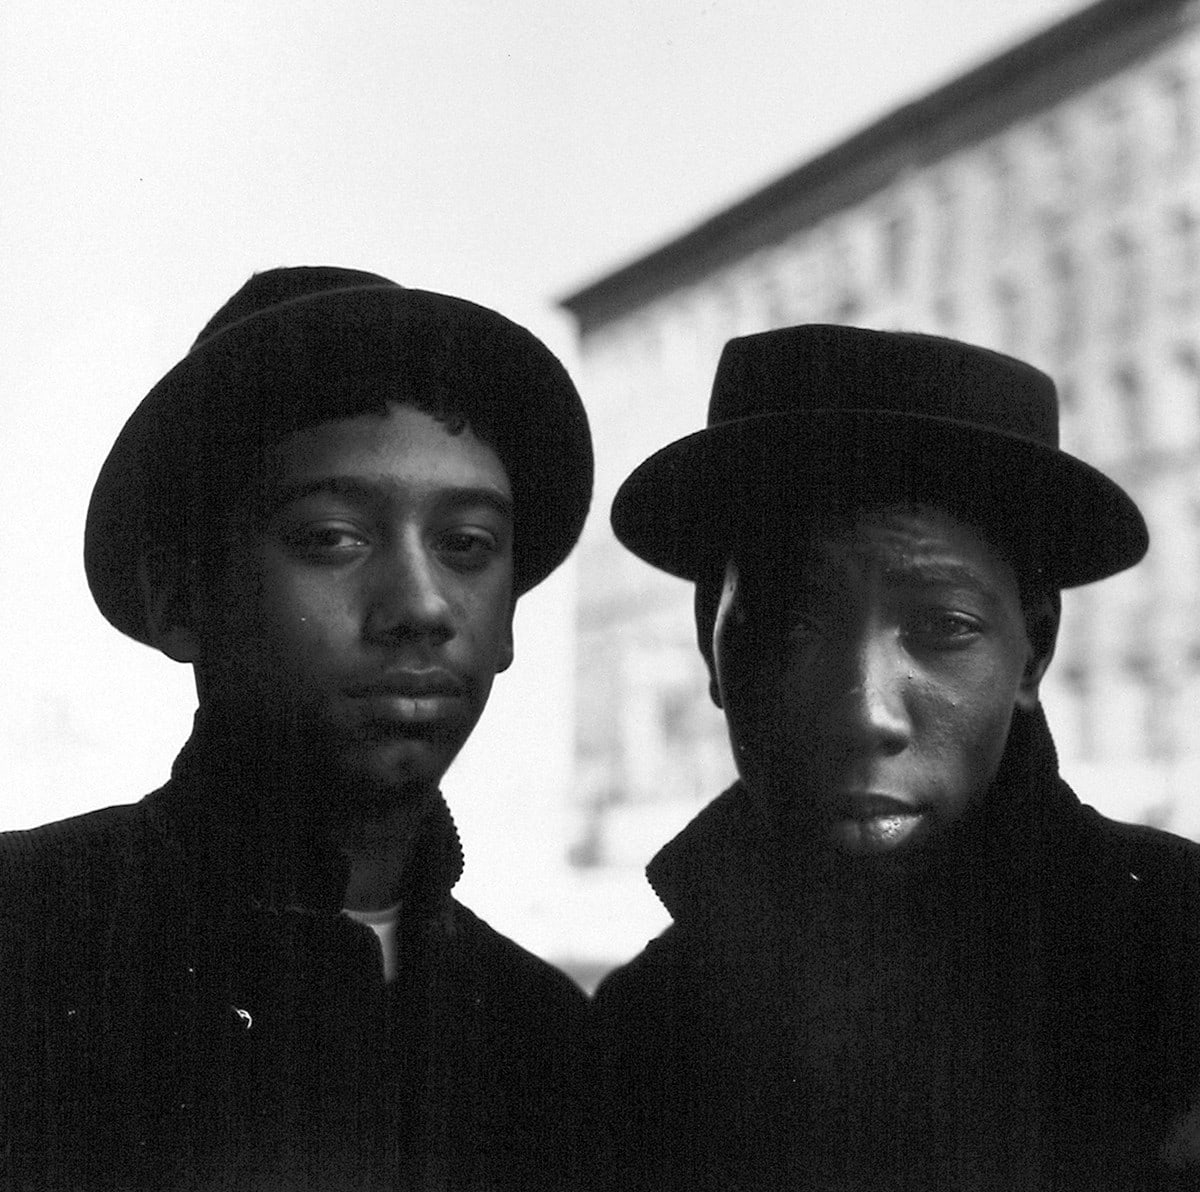 Bruce Davidson, East 100th Street (two young men in hats), 1966-1968